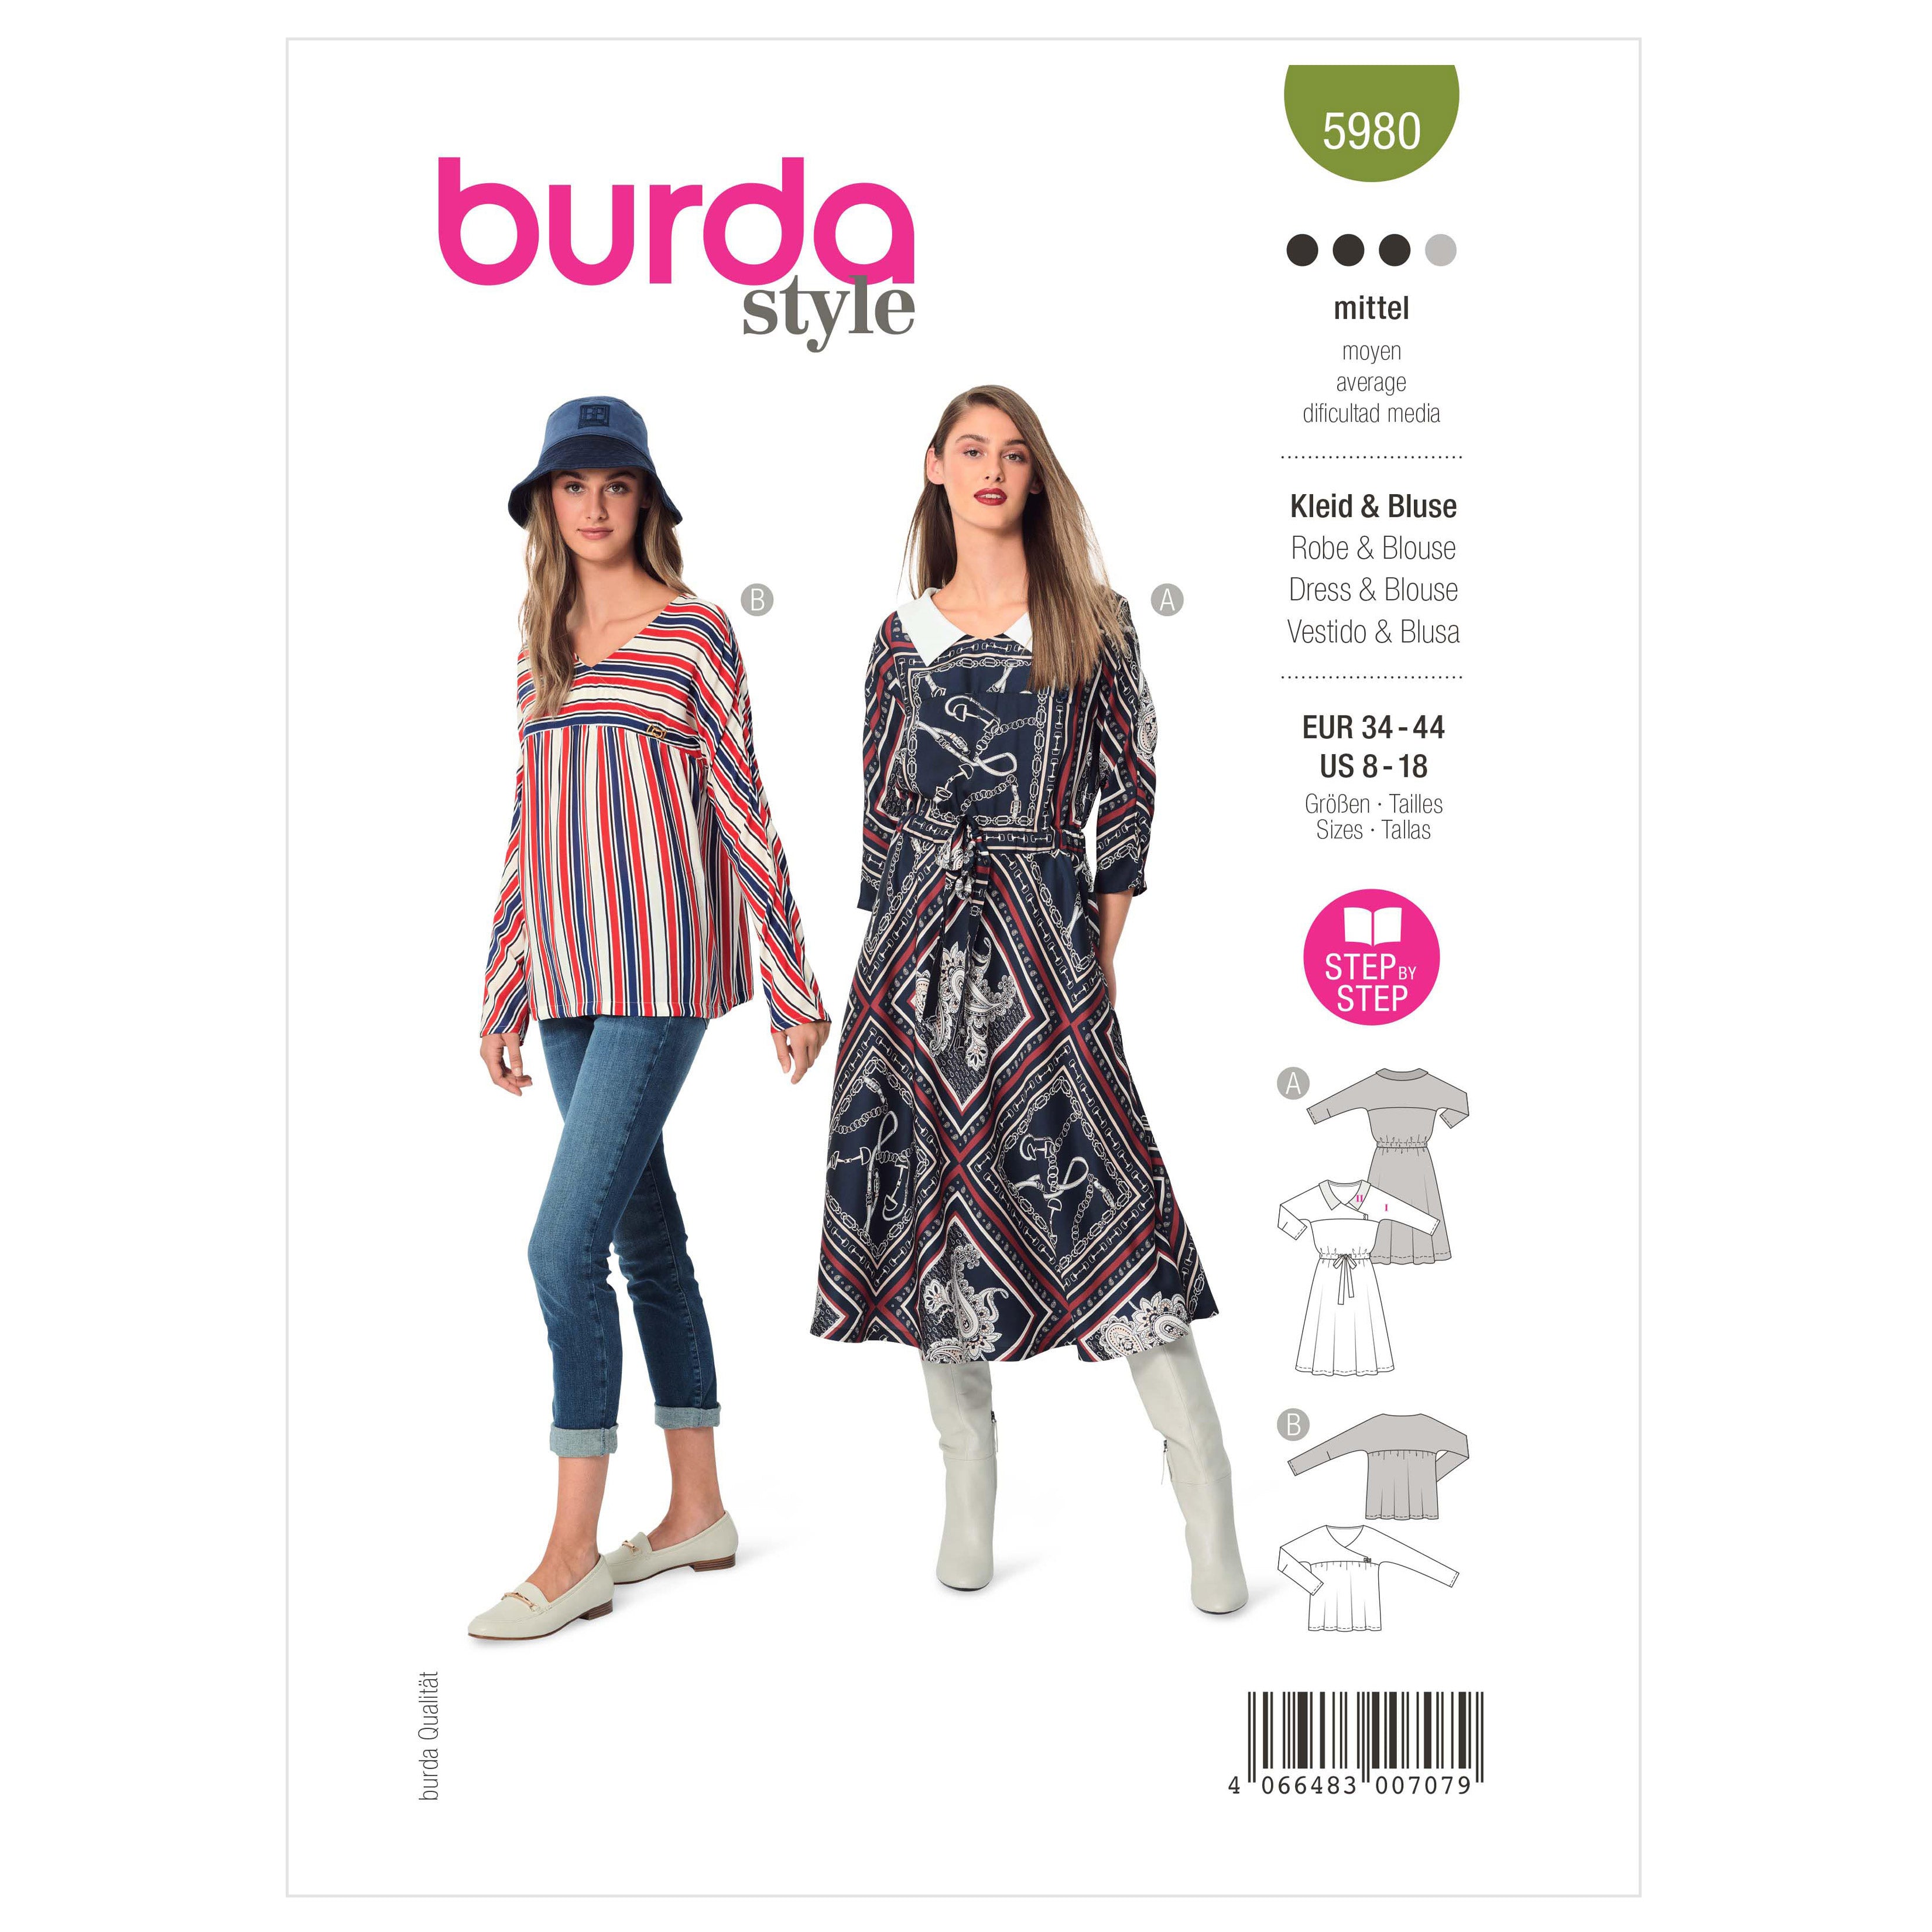 Burda Sewing Pattern 5980 Misses' Dress and Blouse from Jaycotts Sewing Supplies